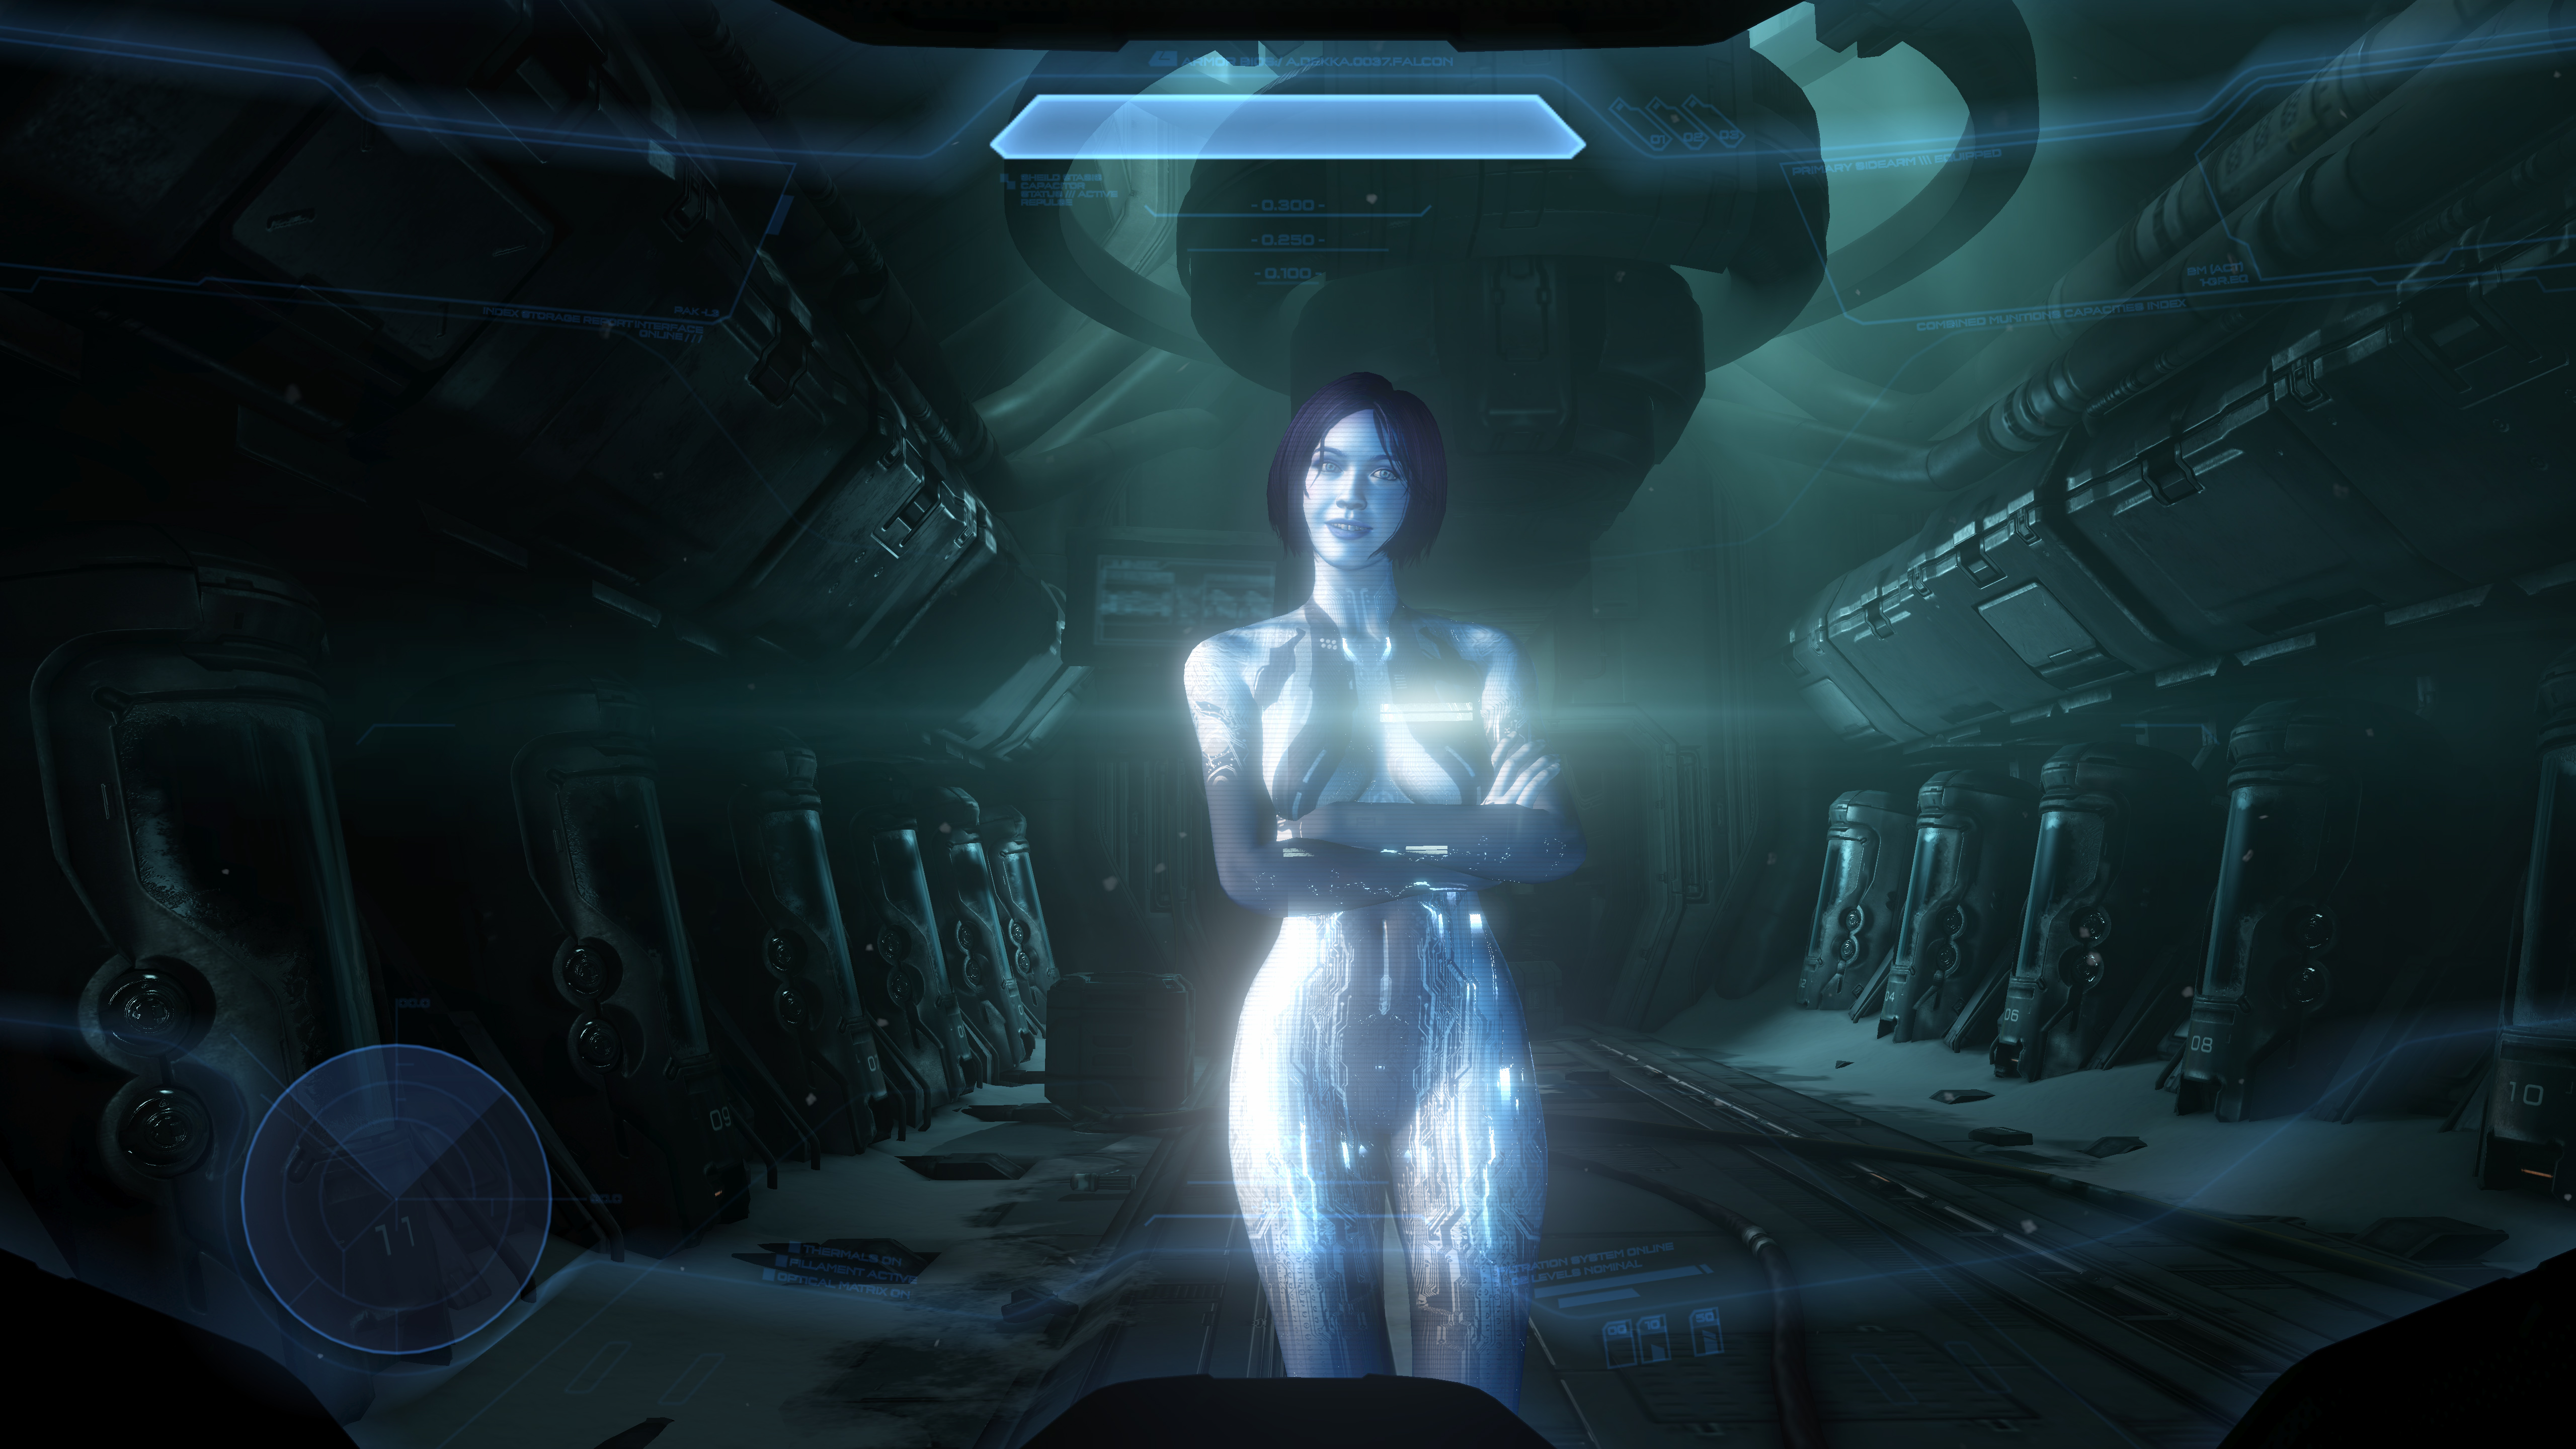 The years have not been kind to Cortana.